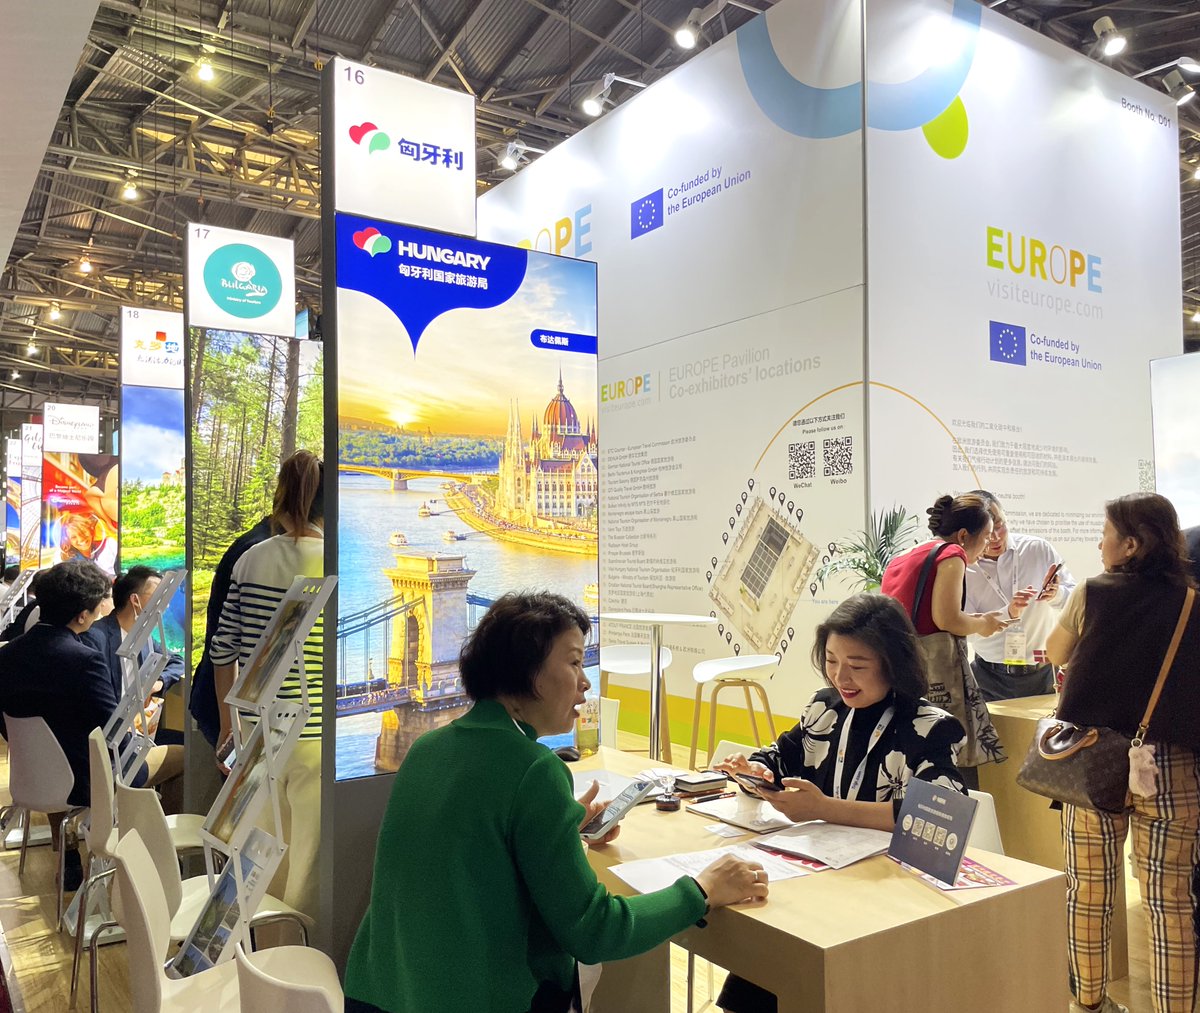 🚀 We're excited to be in Shanghai🇨🇳 for @ITB_China! Find us at the #EUROPE 🌎 pavilion, where we showcase the wonder of European travel alongside 24 of our members & partners. ♻ ETC is proud to have a booth made of reusable and recyclable materials, with all emissions offset.